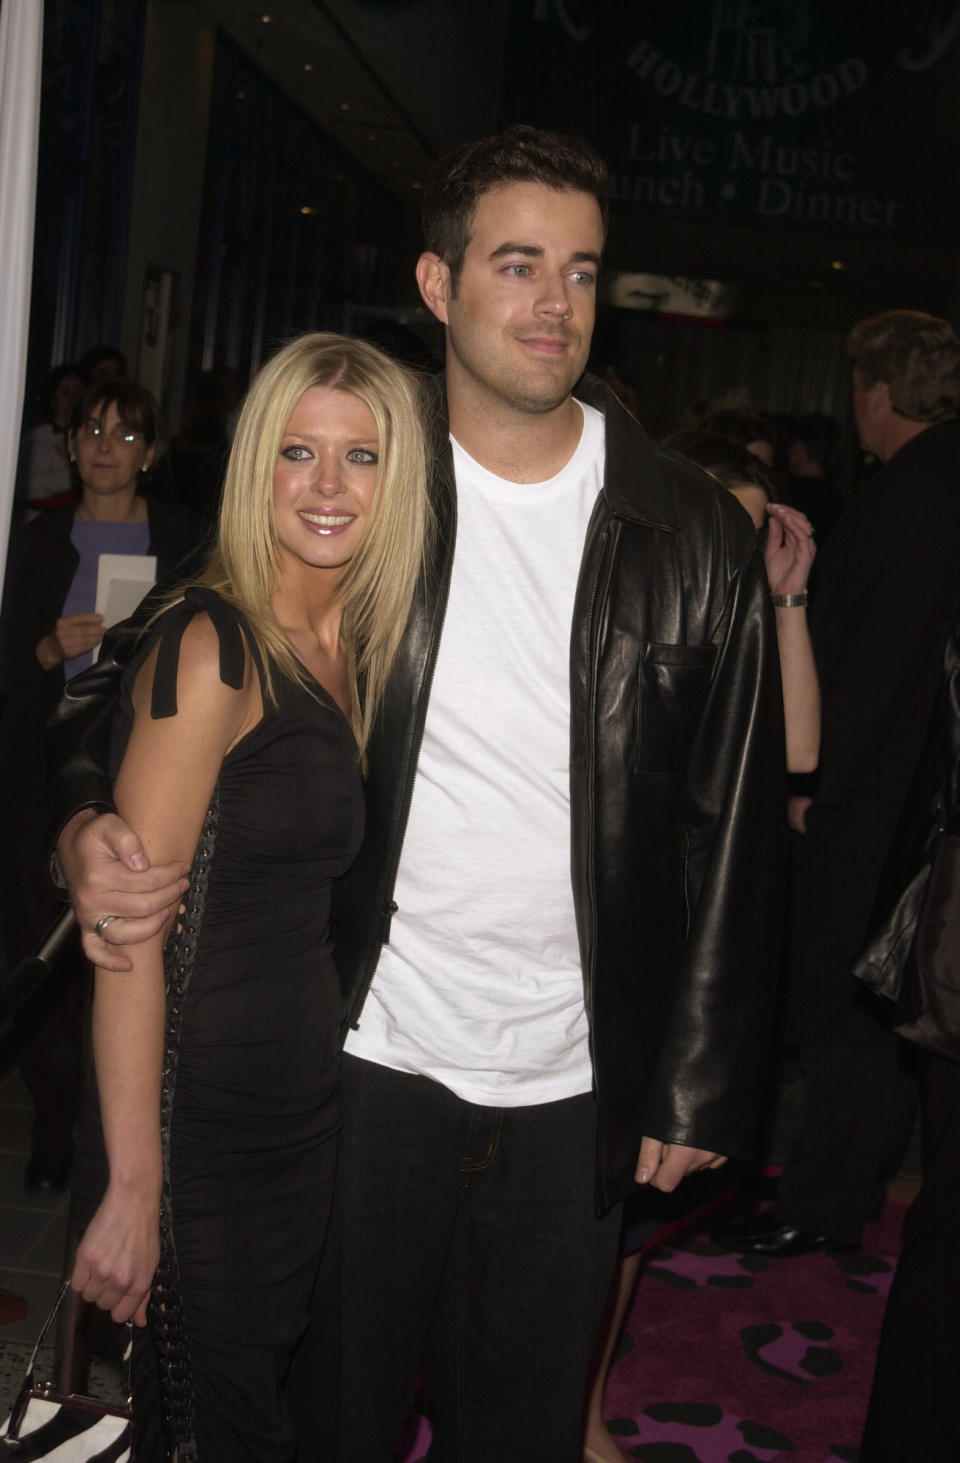 Tara Reid and fiance Carson Daly arrive at the premiere of "Josie and the Pussycats"